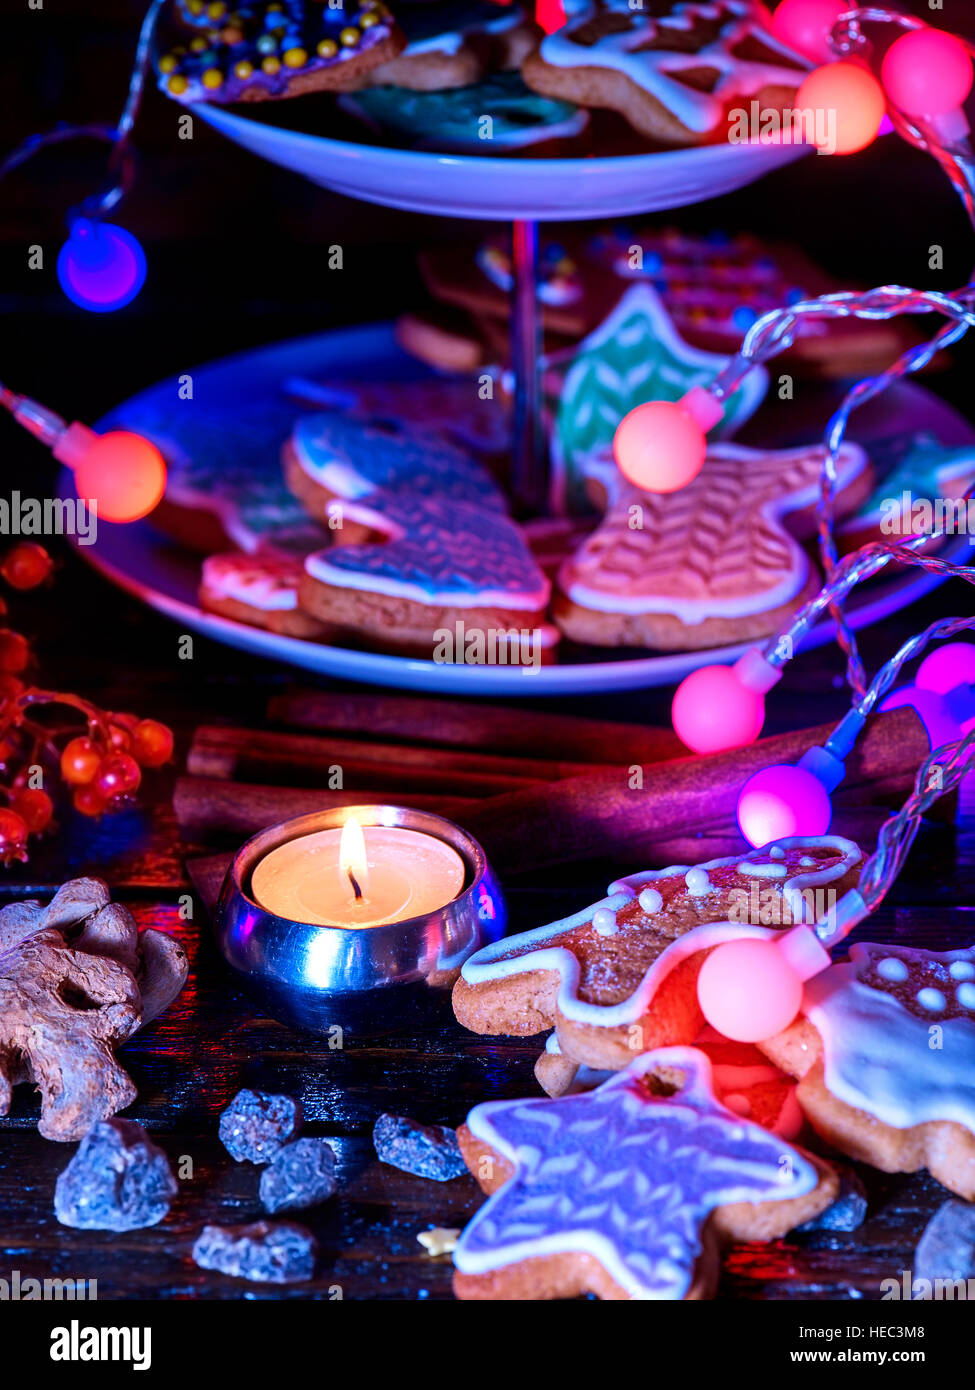 Gingerbread man on tiered cake. Food decoration christmas lights string. Stock Photo